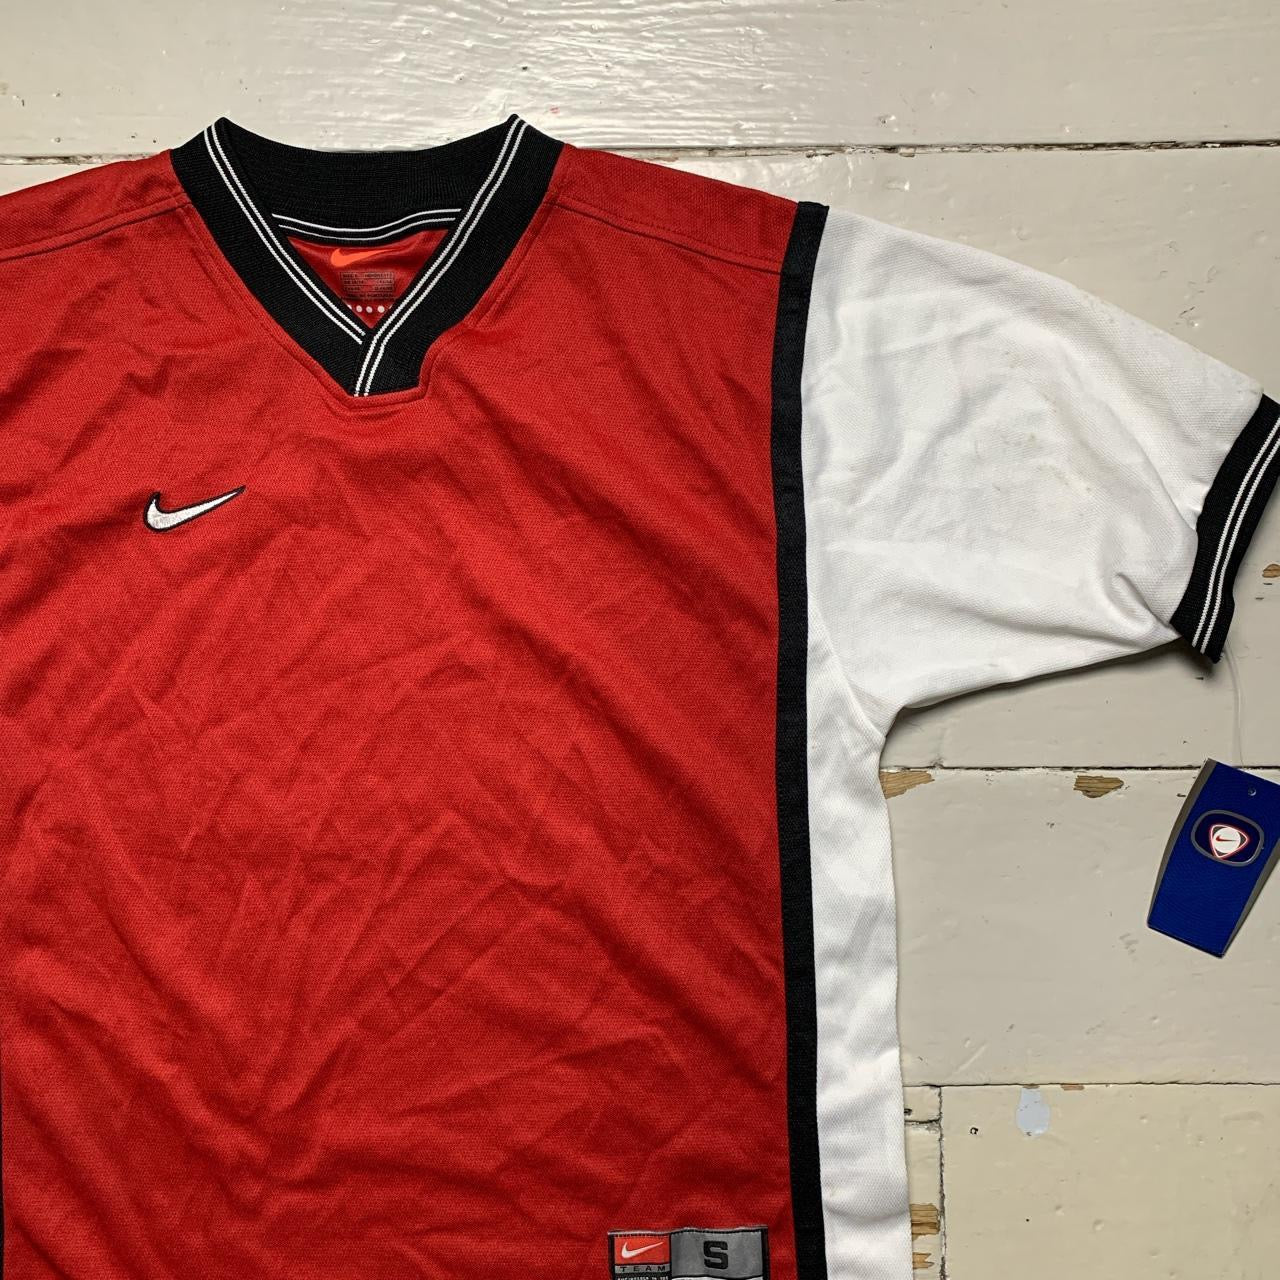 Nike Vintage 90s Football Jersey (Small)